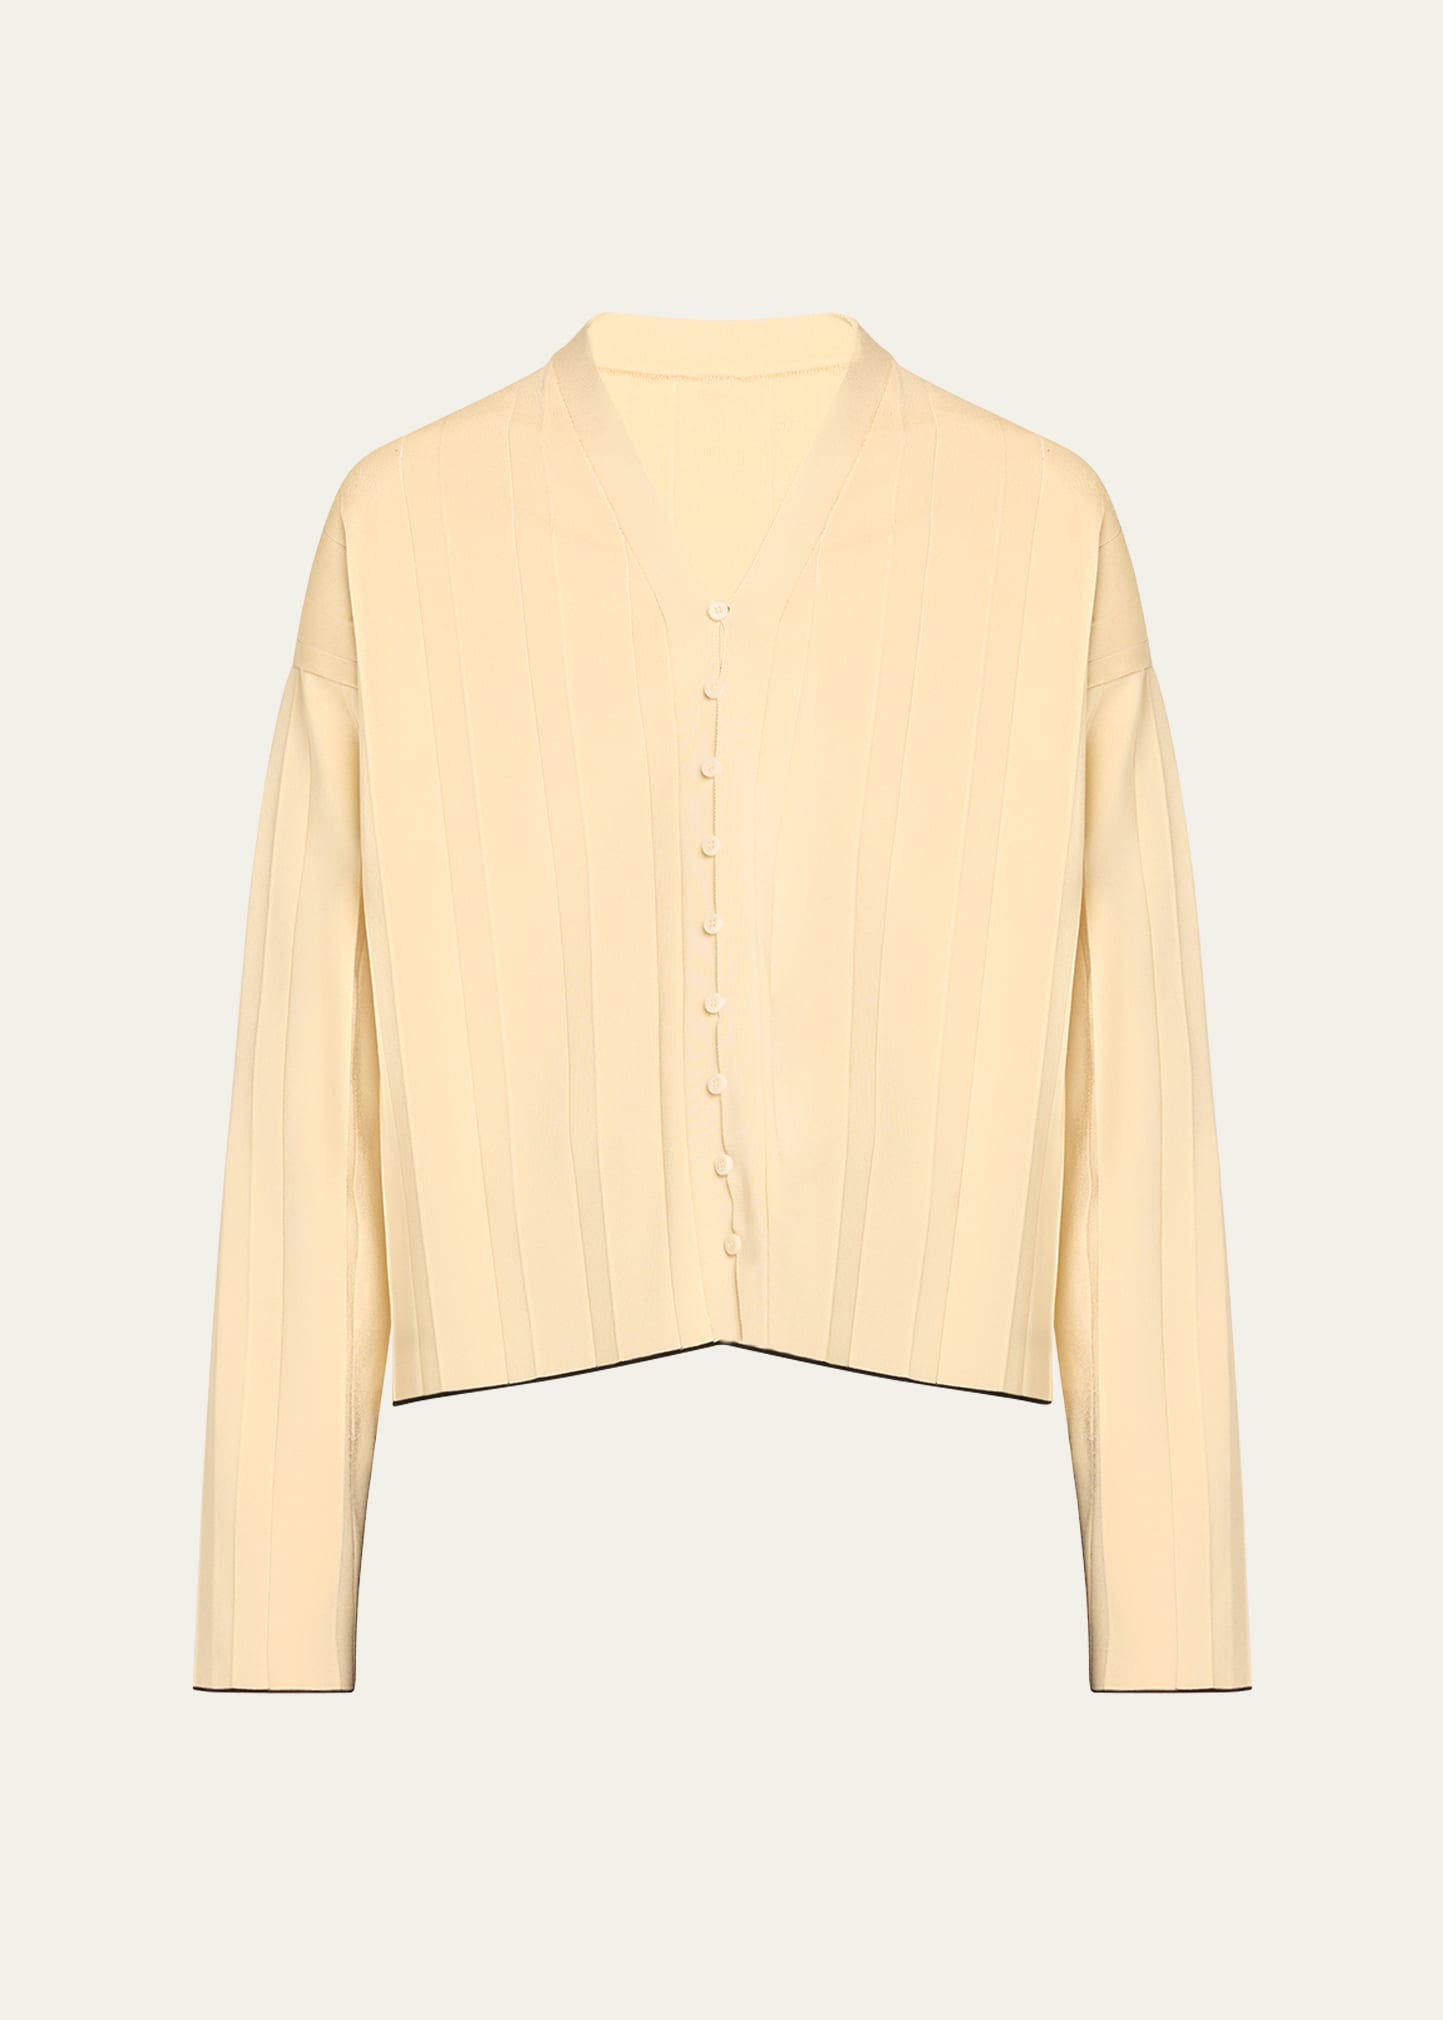 Jacquemus Men's Pleated Cardigan Sweater In Light Ivory